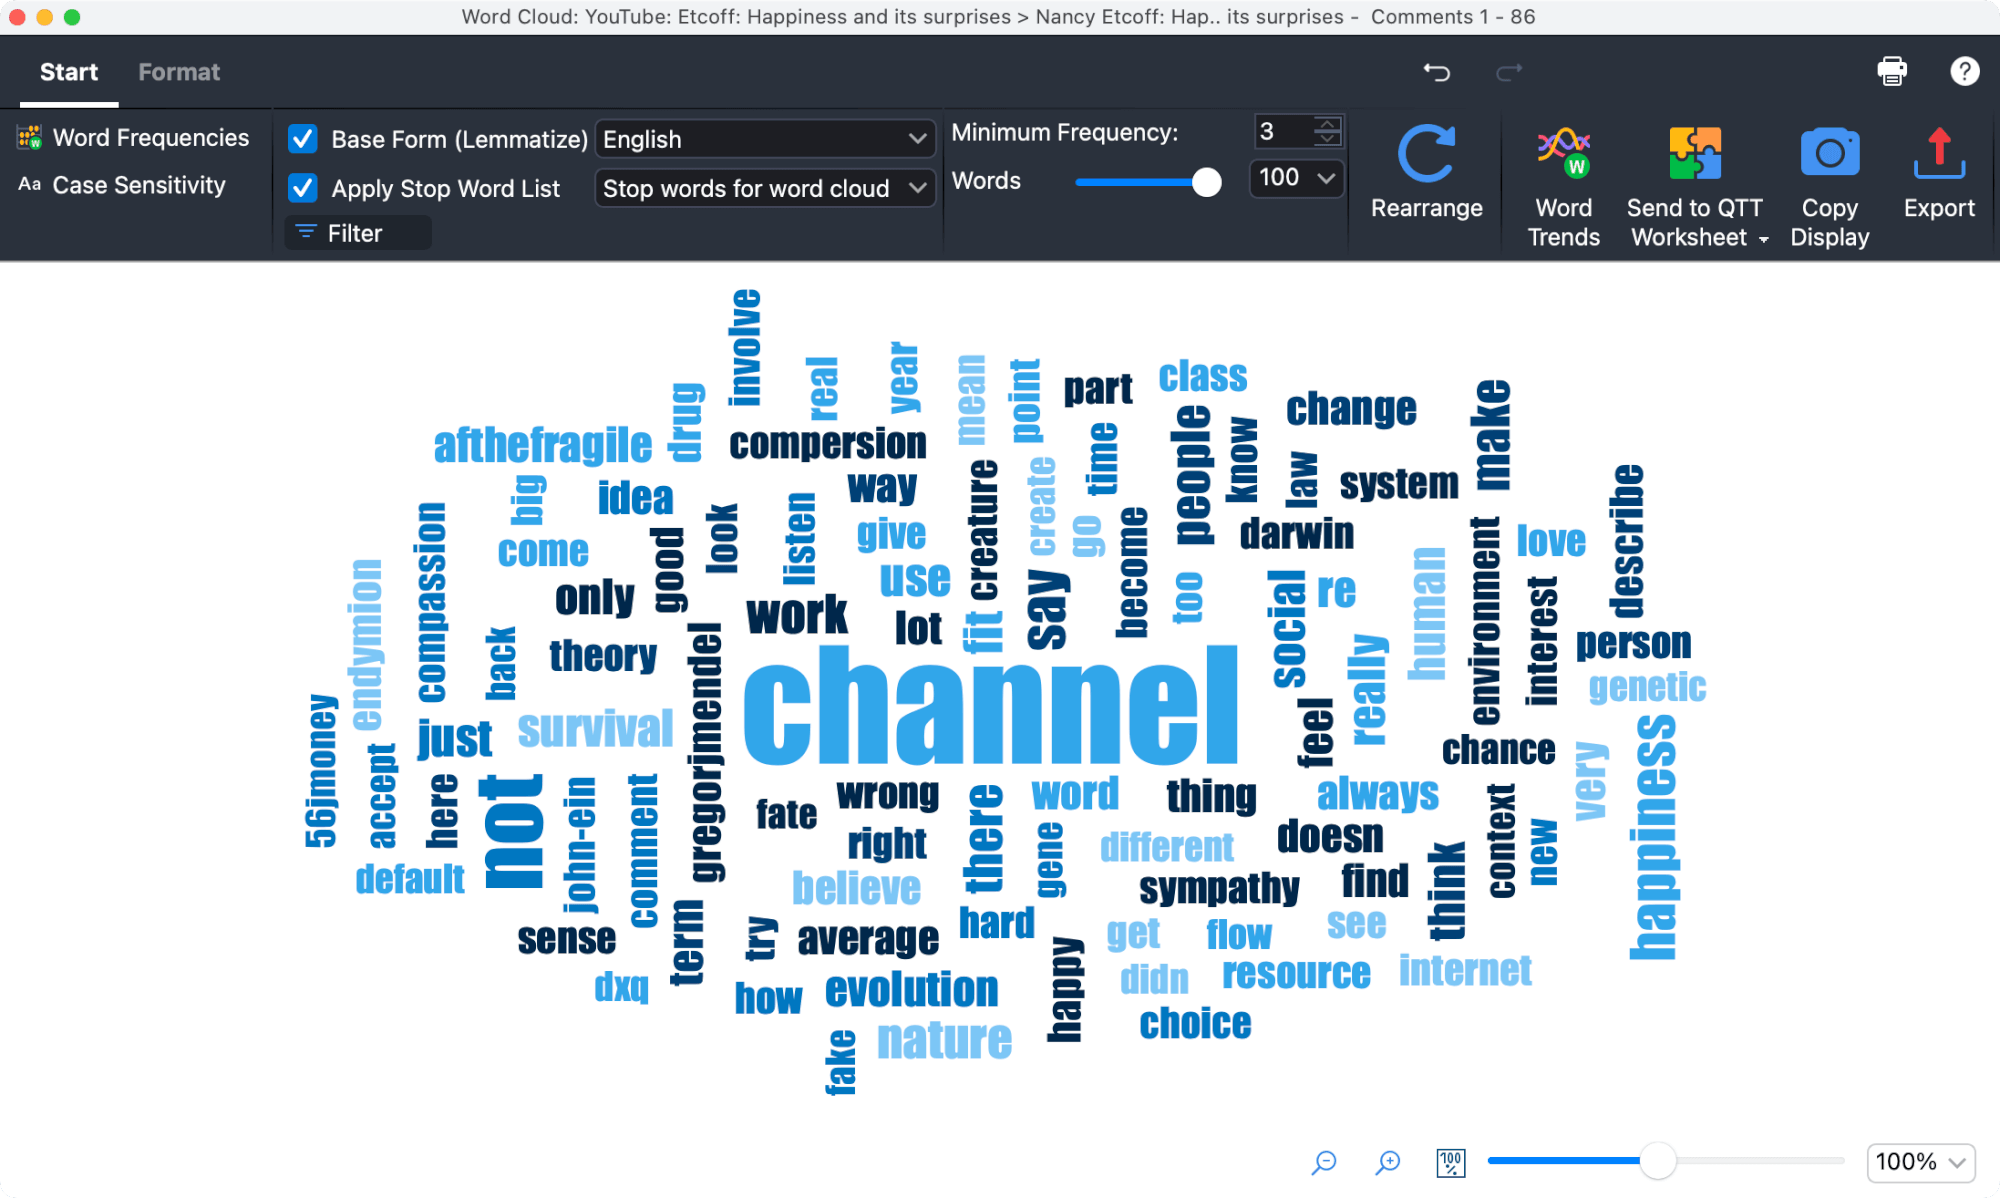 Word Cloud displaying the most frequent words of YouTube comments